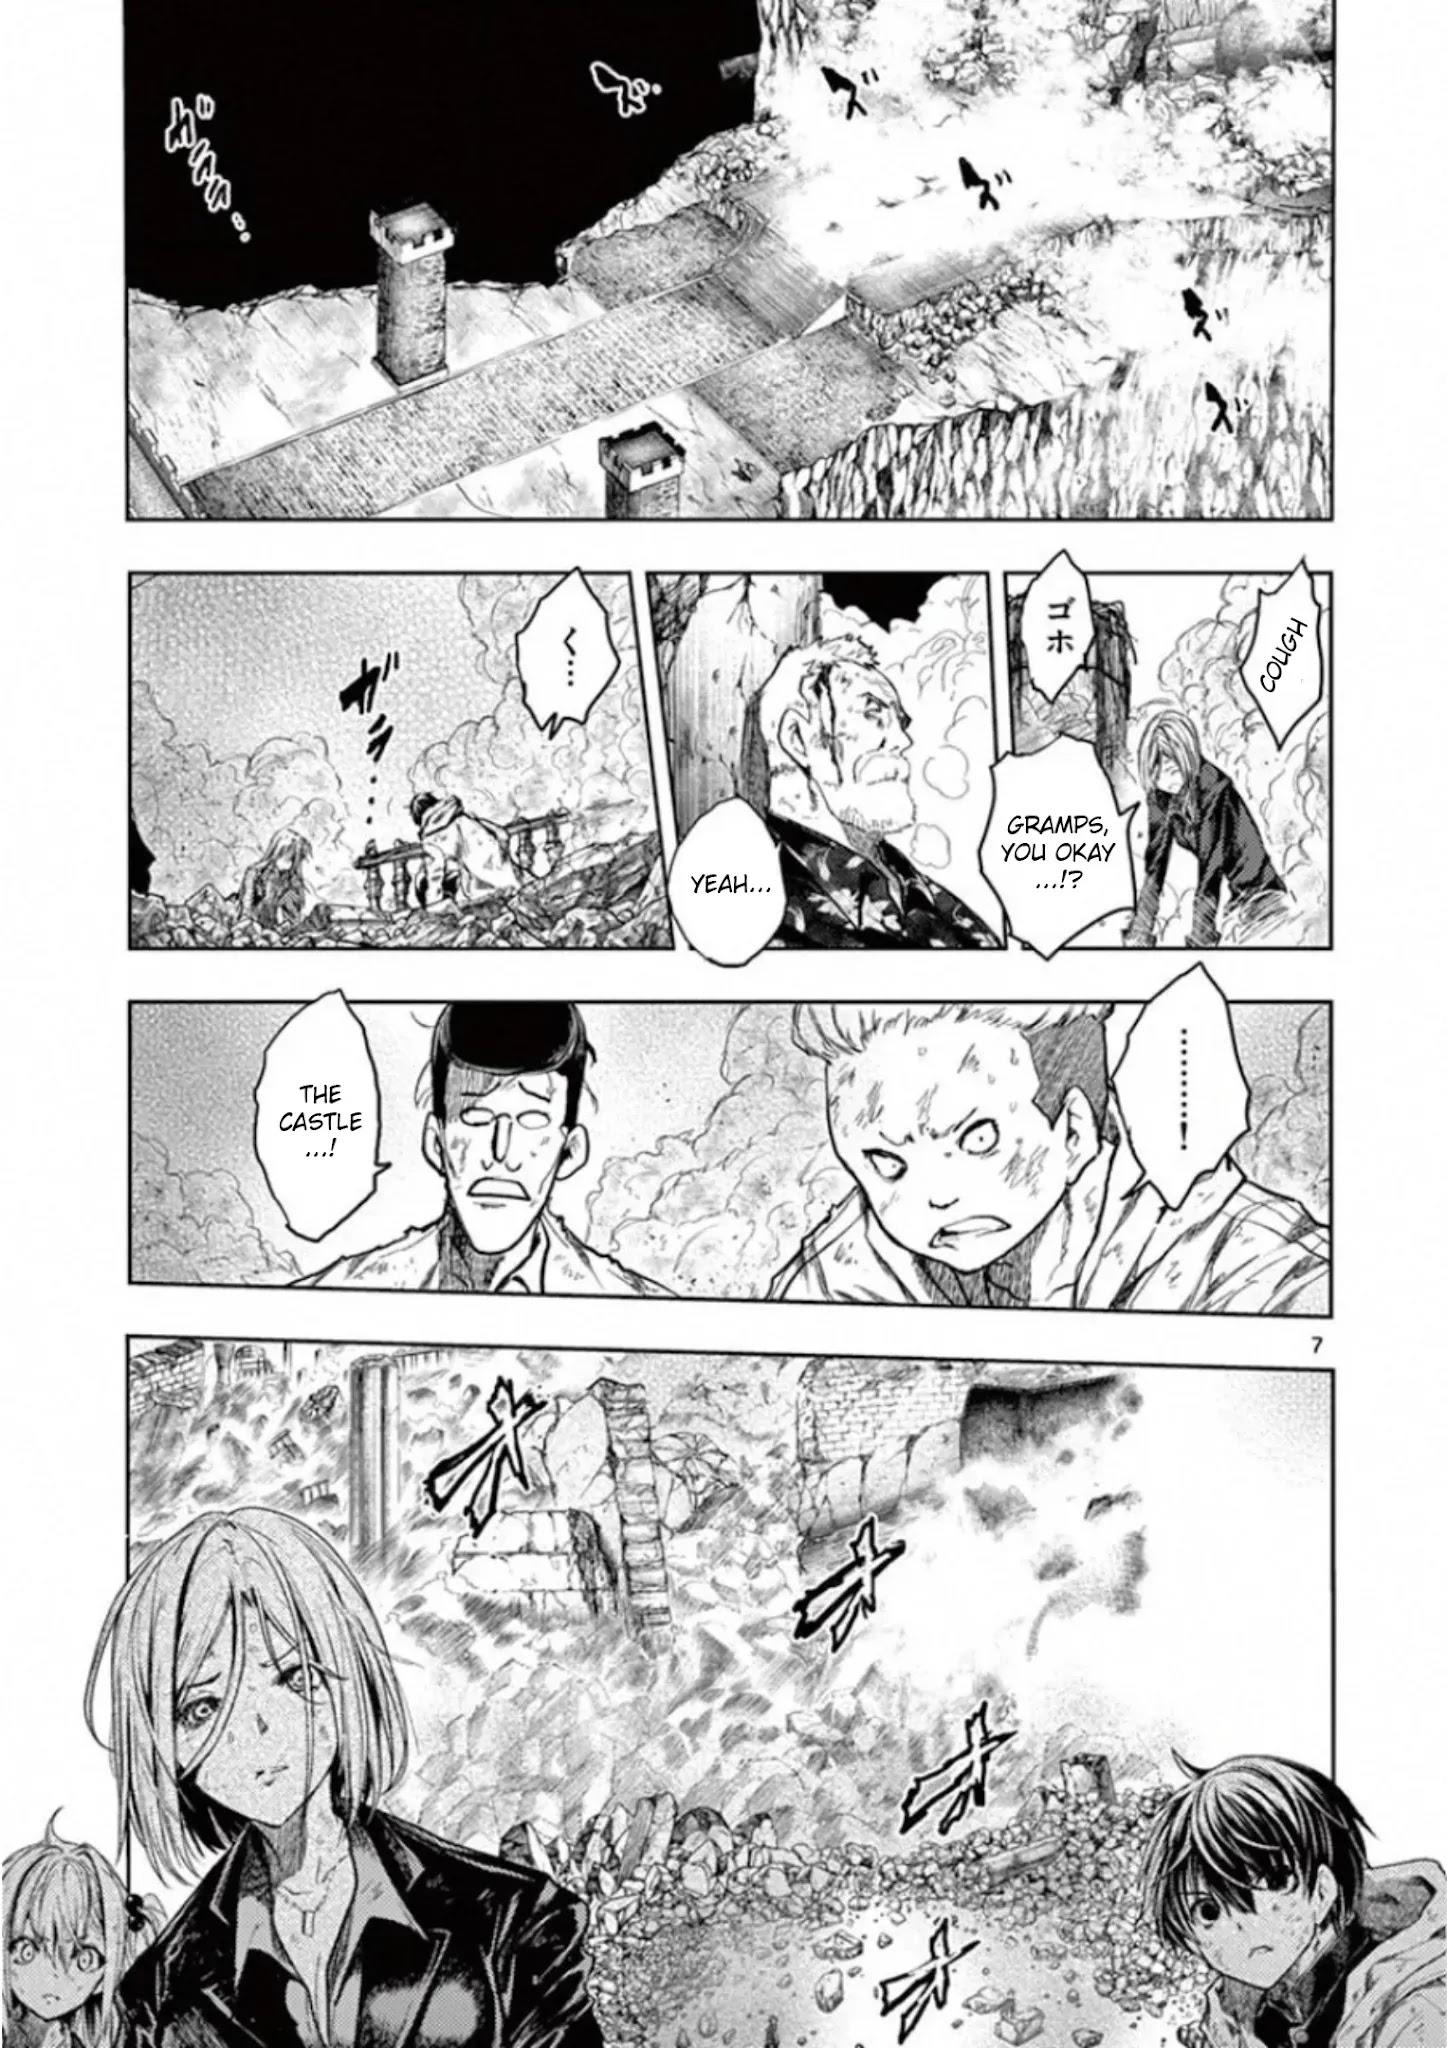 Deatte 5 Byou De Battle Chapter 143: To The Exit page 7 - Mangakakalots.com